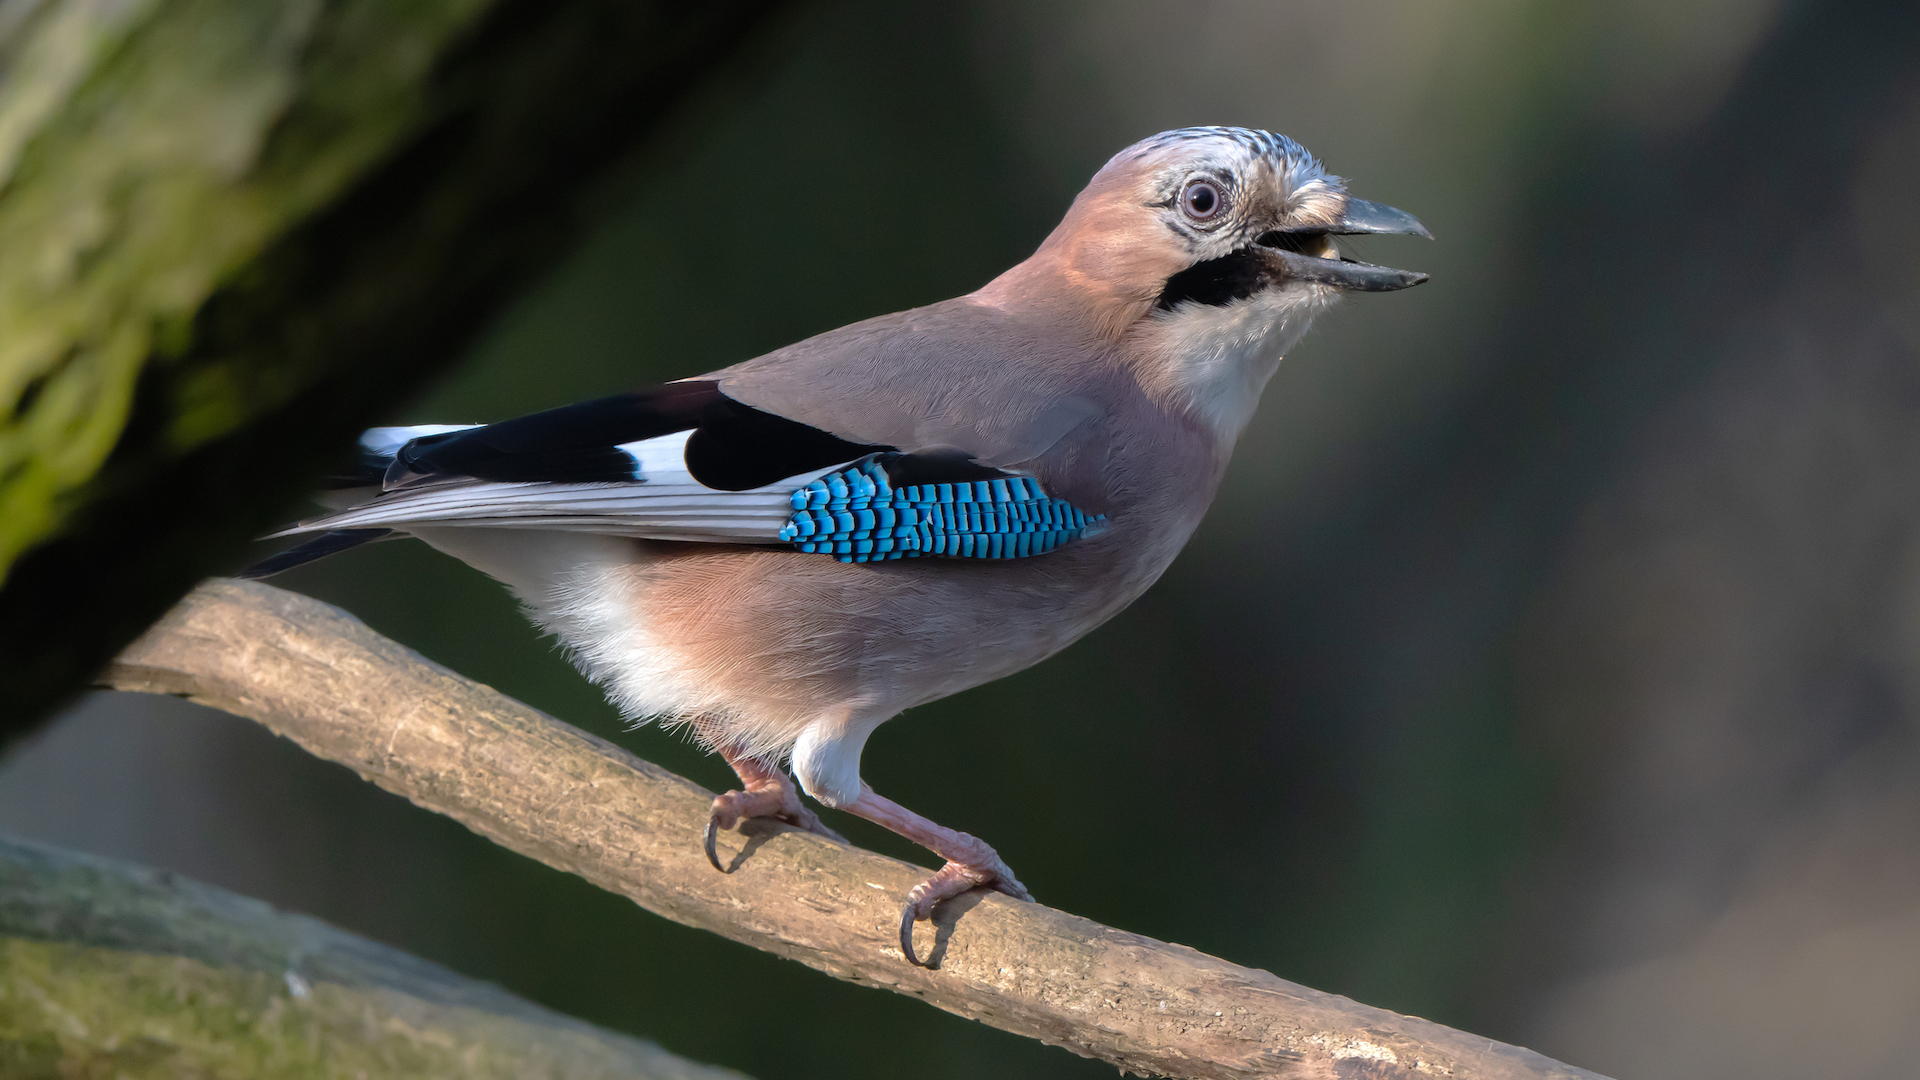 A photograph of a Eurasian jay perching on a branch